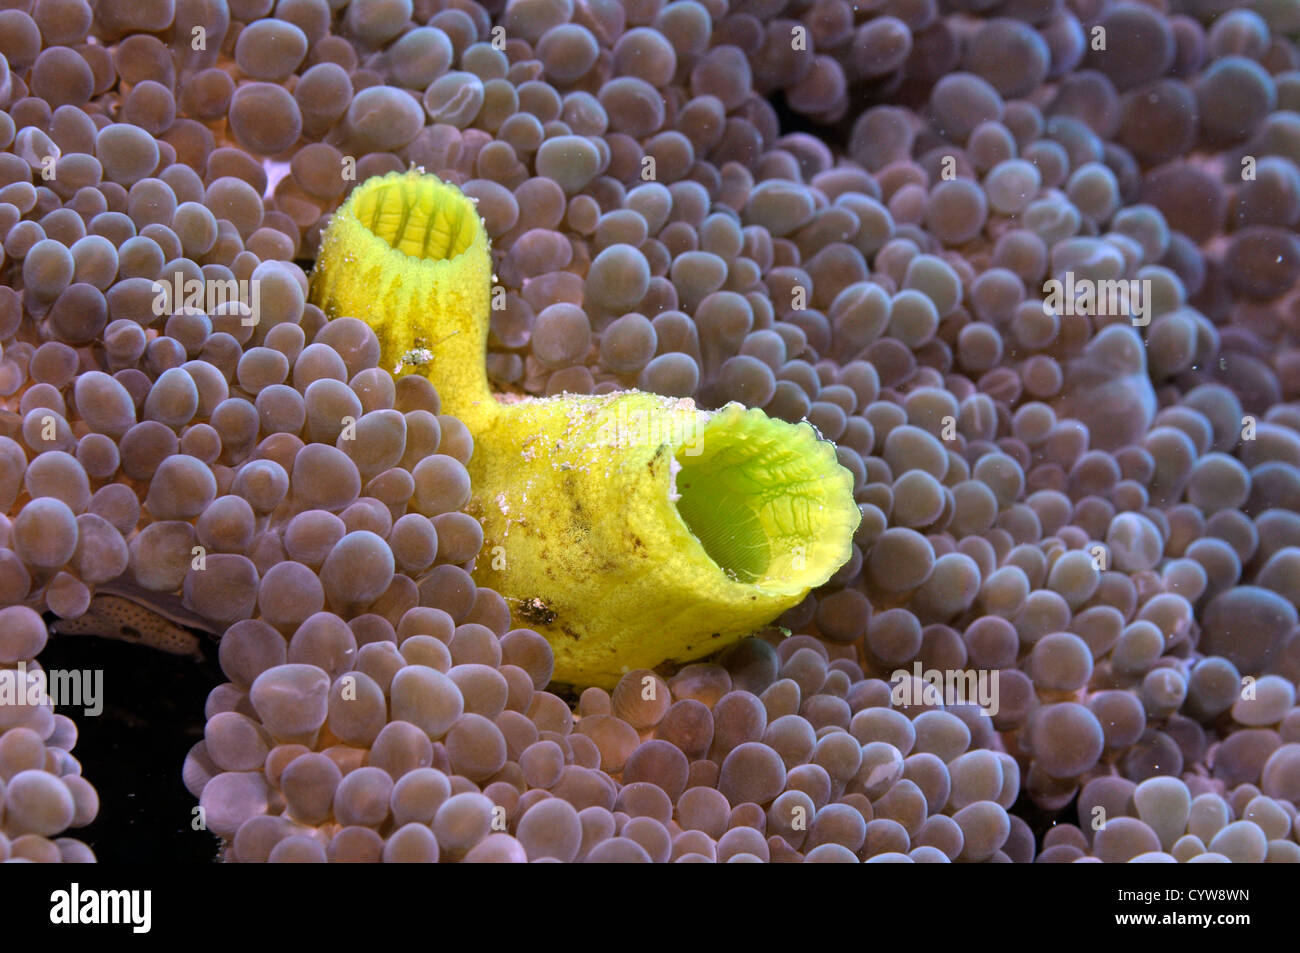 Ascidian, possibly Phallusia julinea, on coral, Pohnpei, Federated States of Micronesia Stock Photo